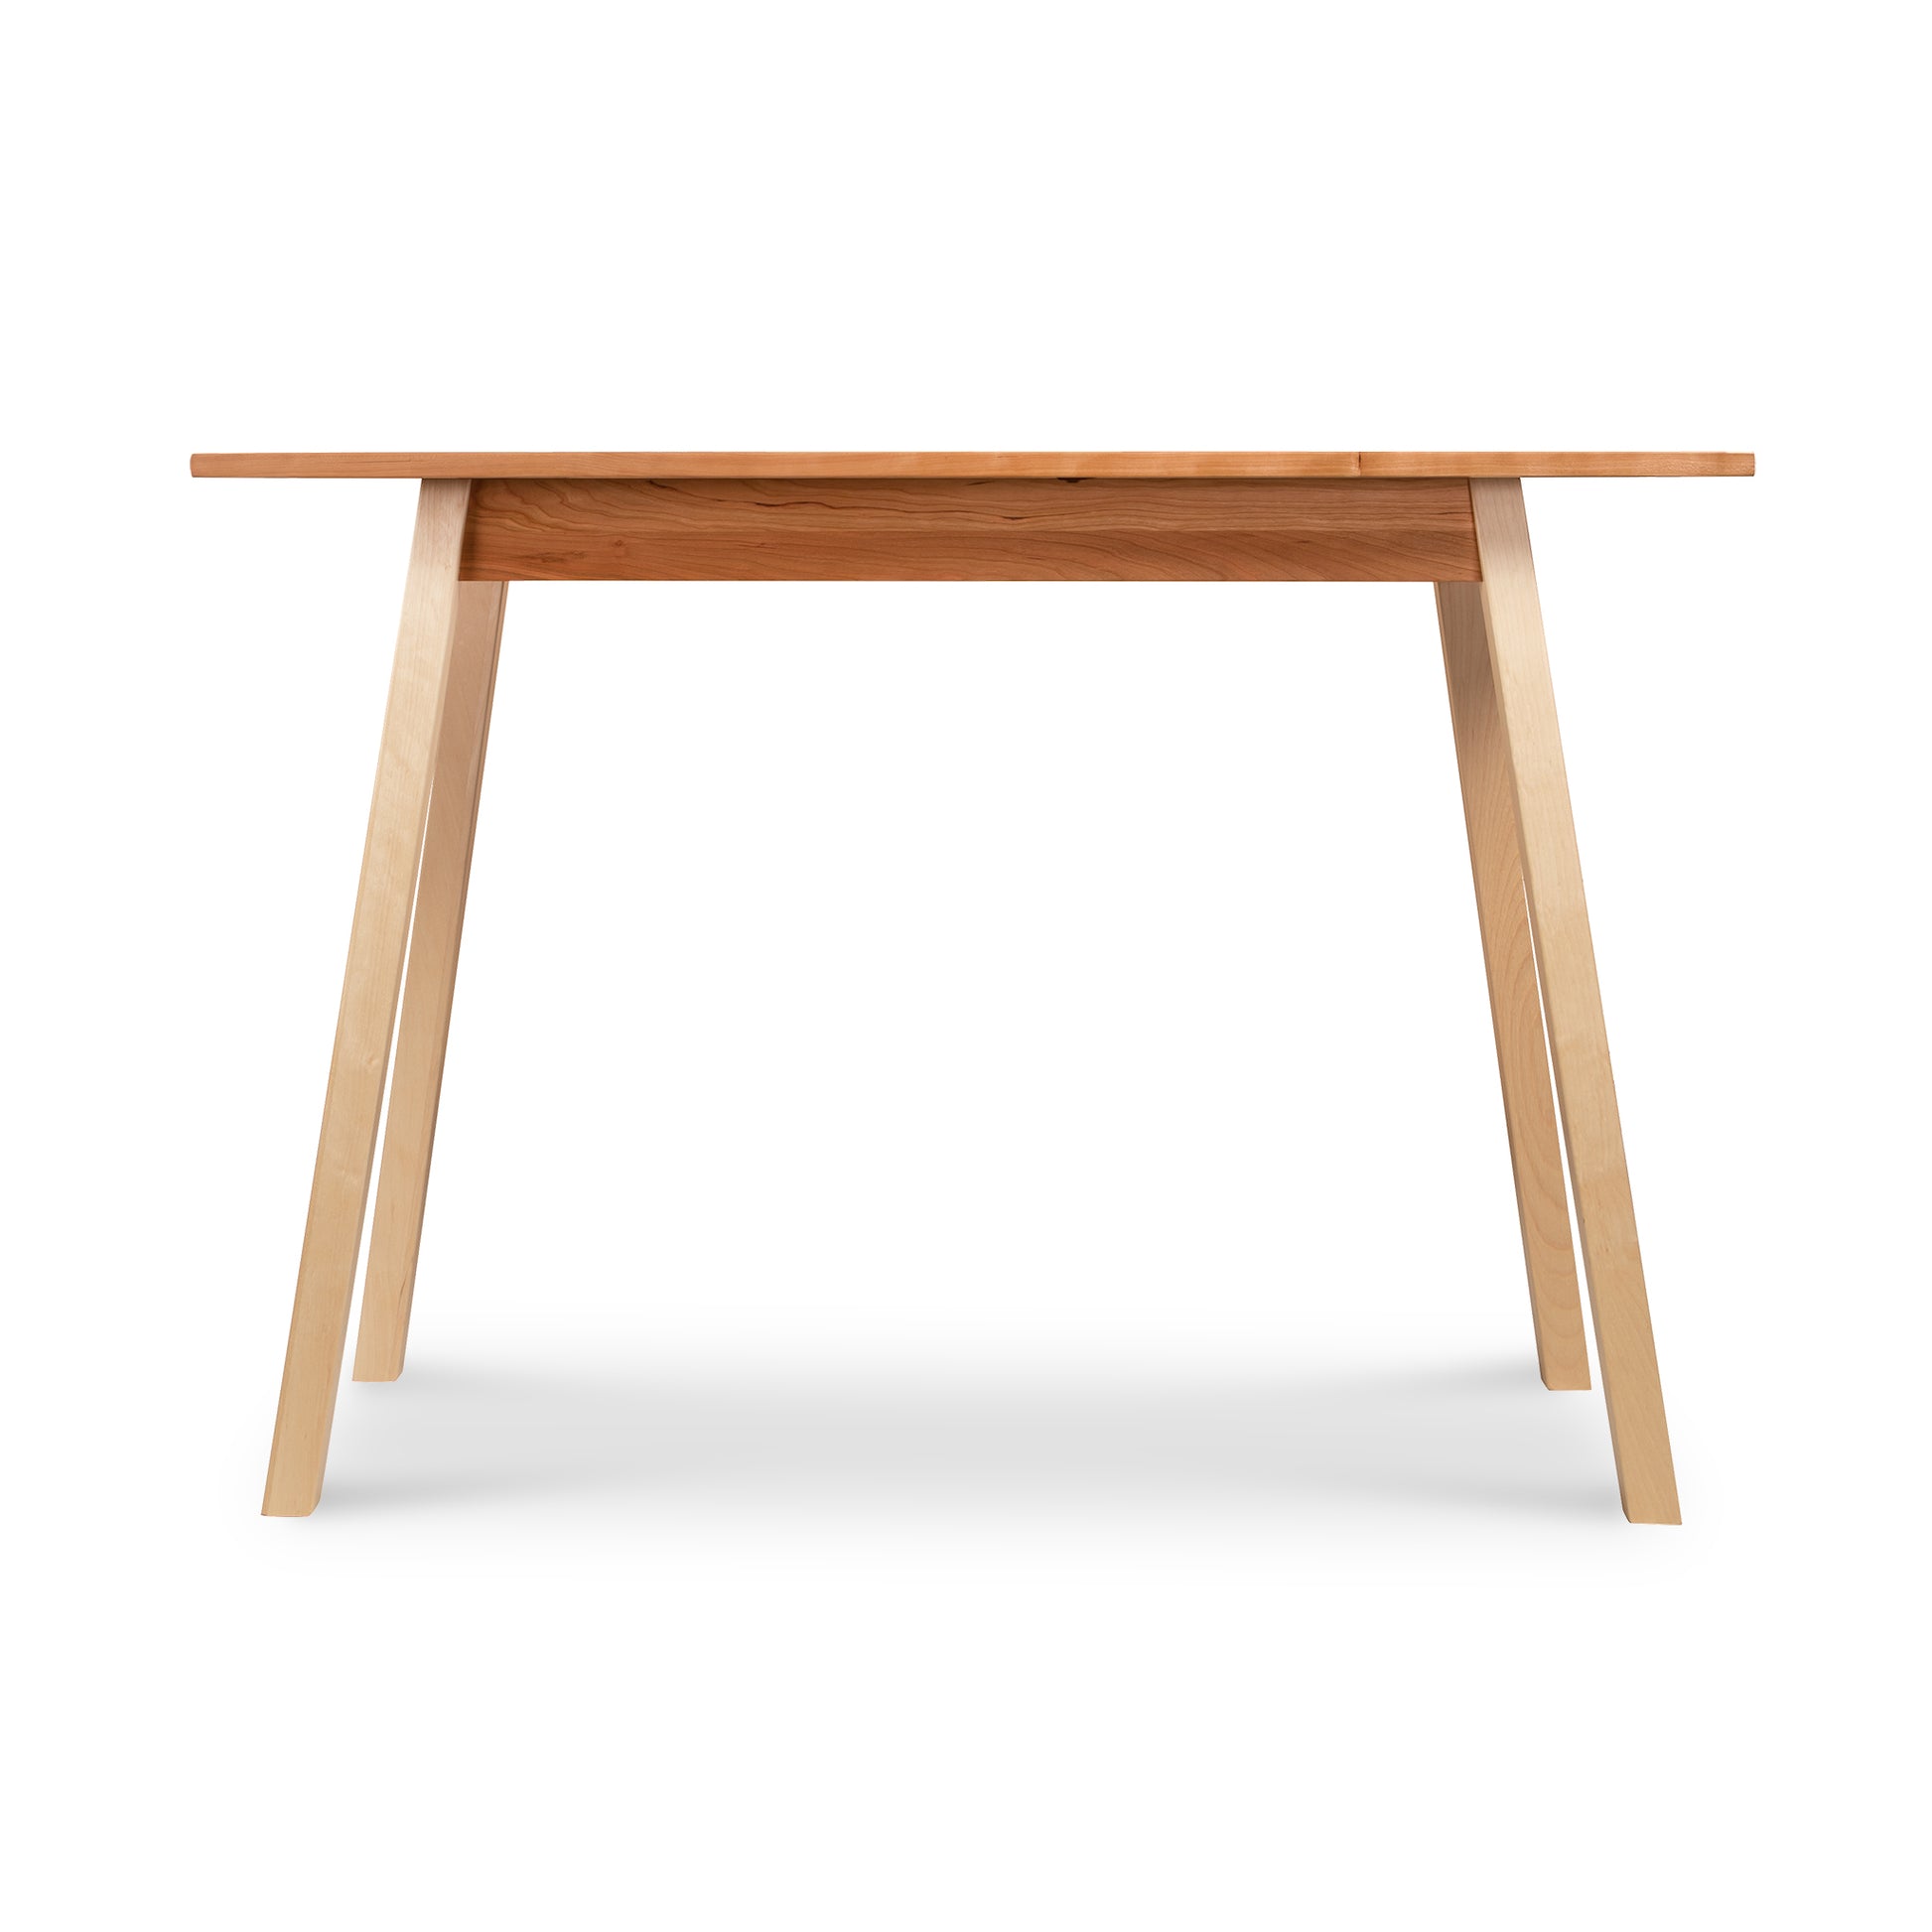 A wooden table with a wooden top and legs.